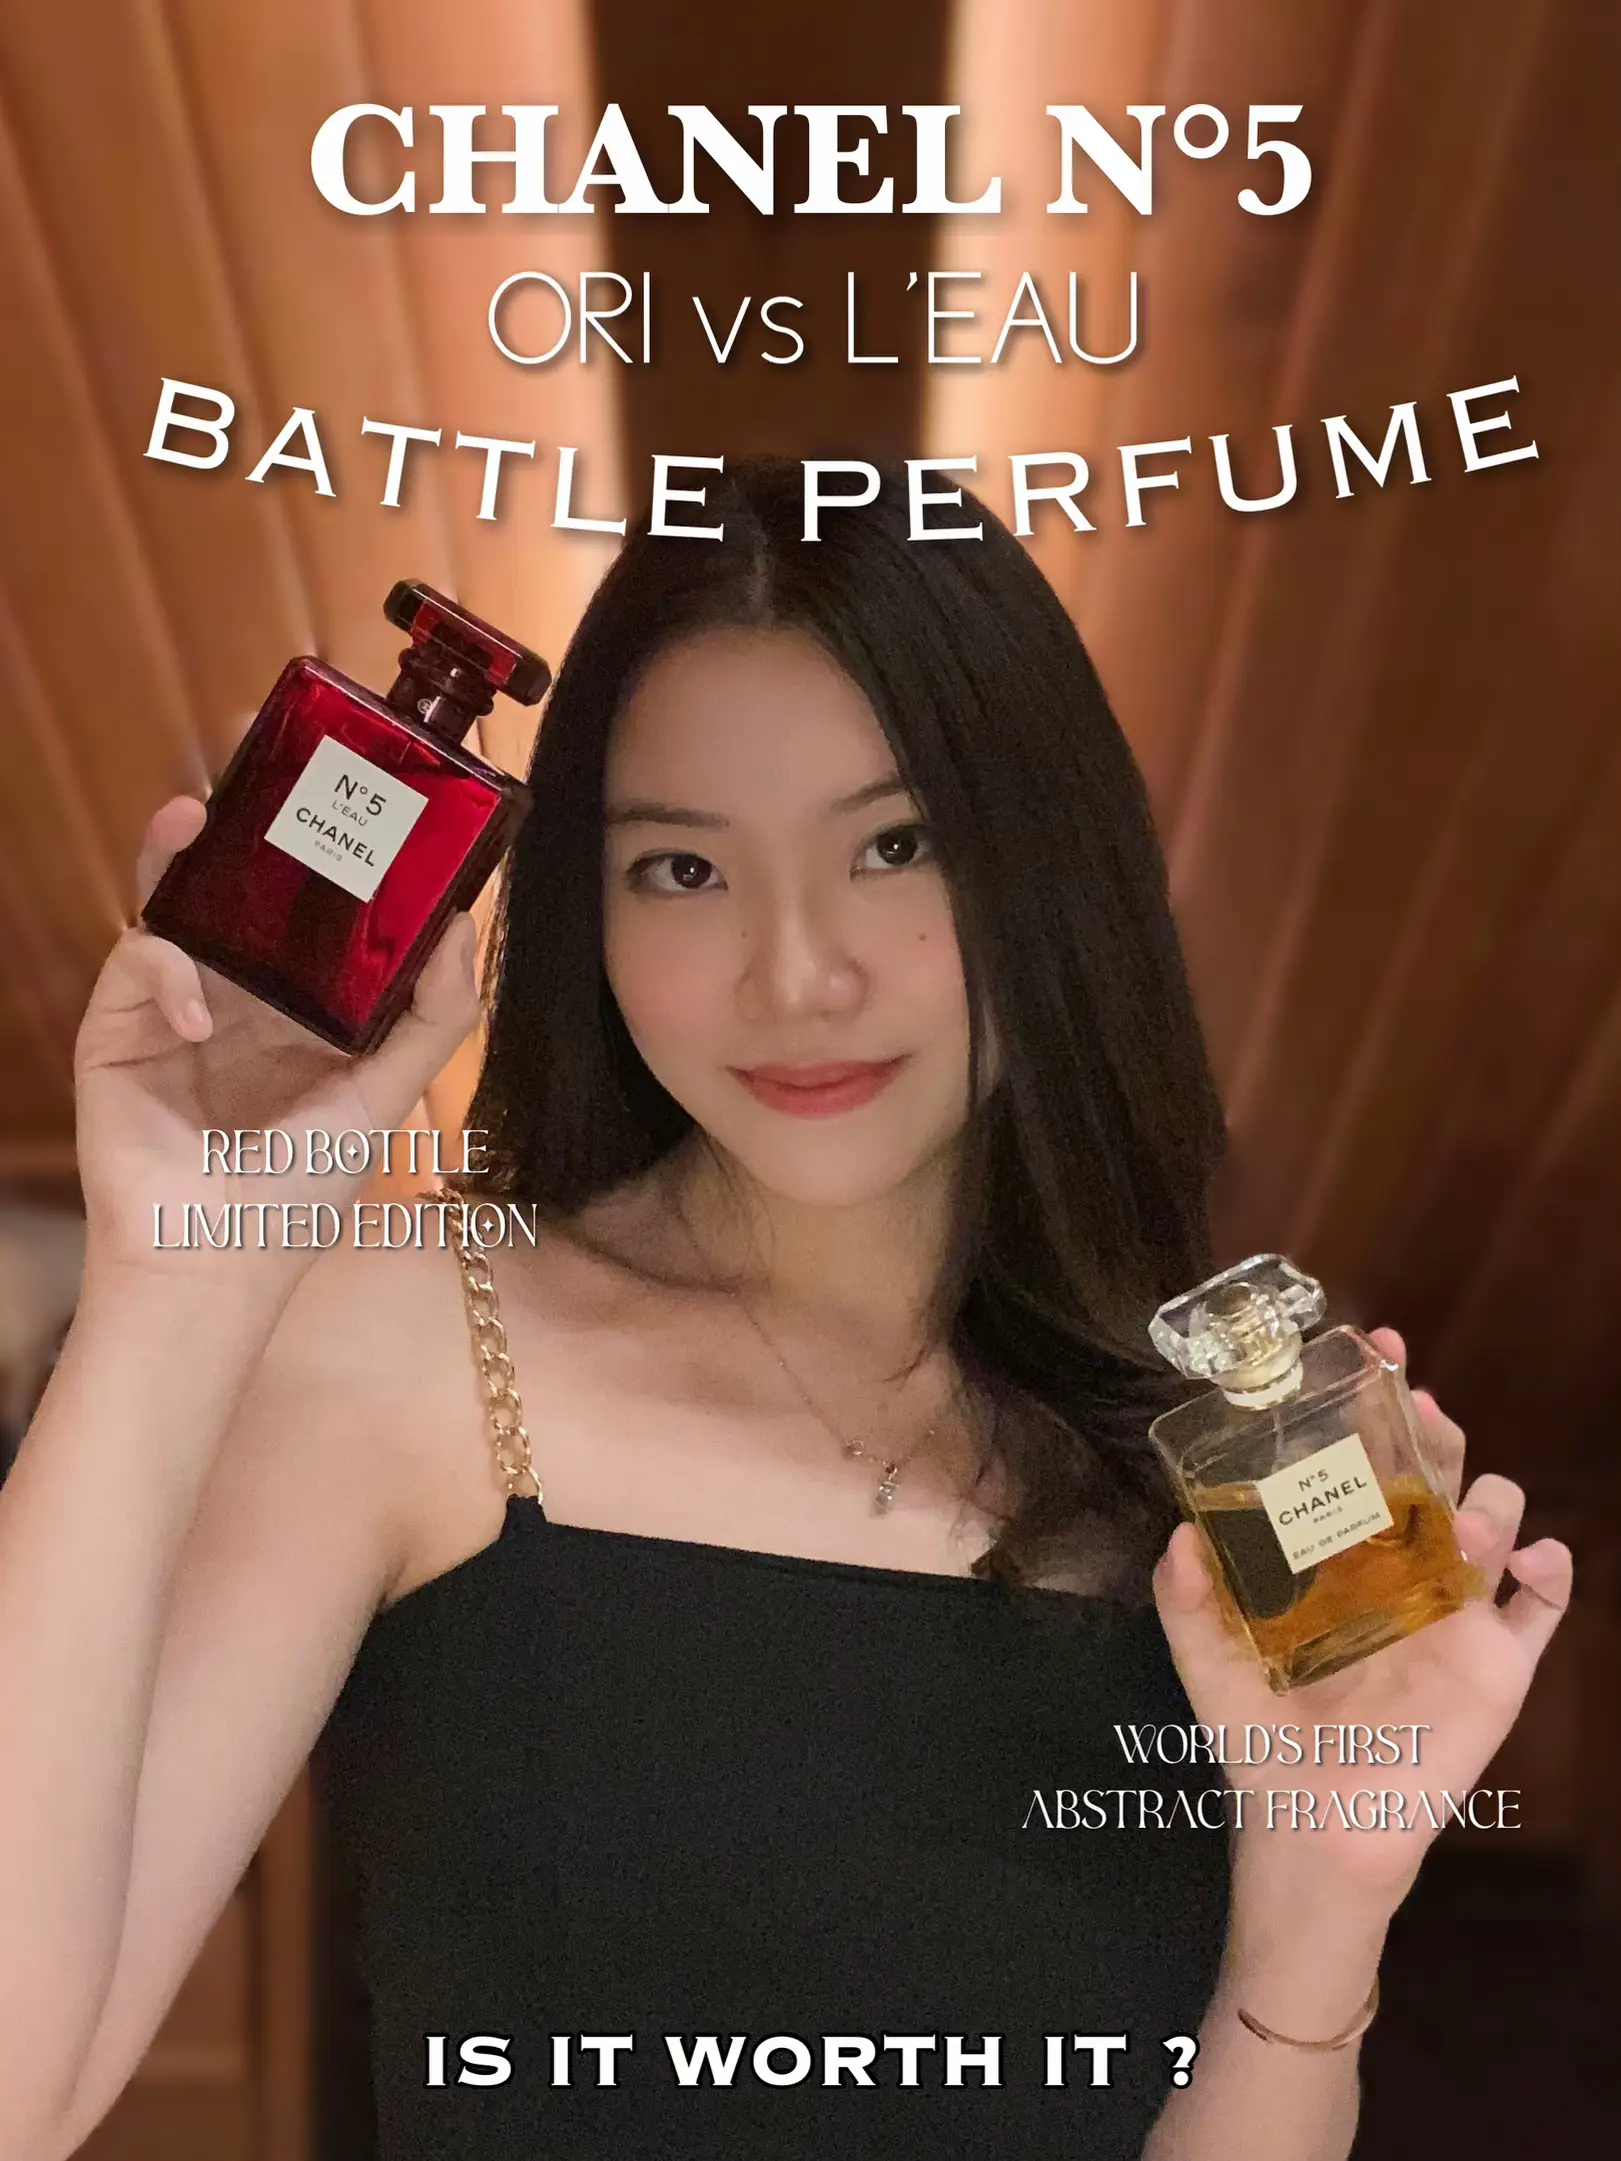 BATTLE ICONIC CHANEL PERFUME 👀🙀🥀, Gallery posted by Valen Cecilia🌷